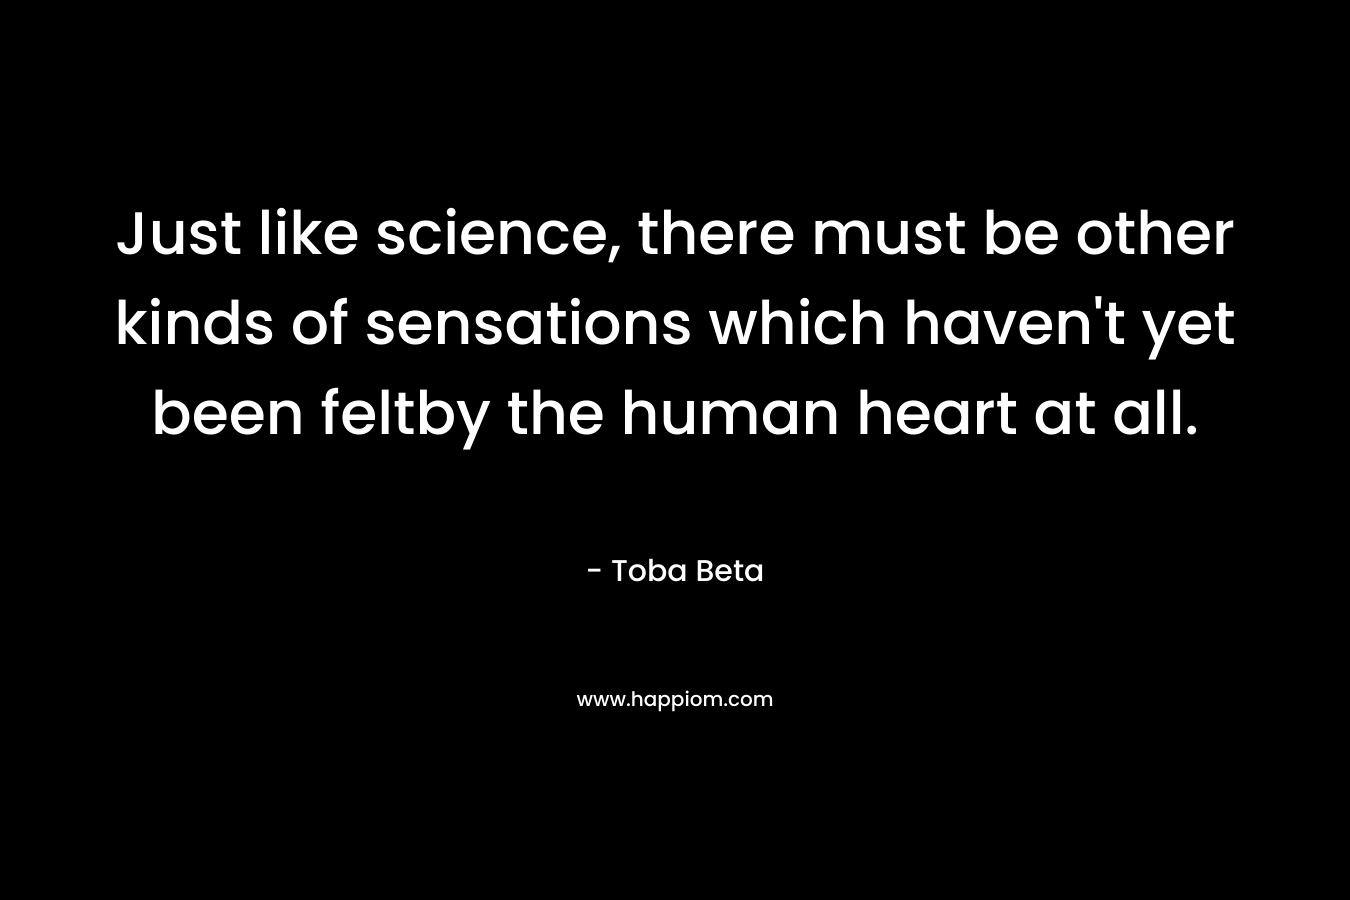 Just like science, there must be other kinds of sensations which haven't yet been feltby the human heart at all.